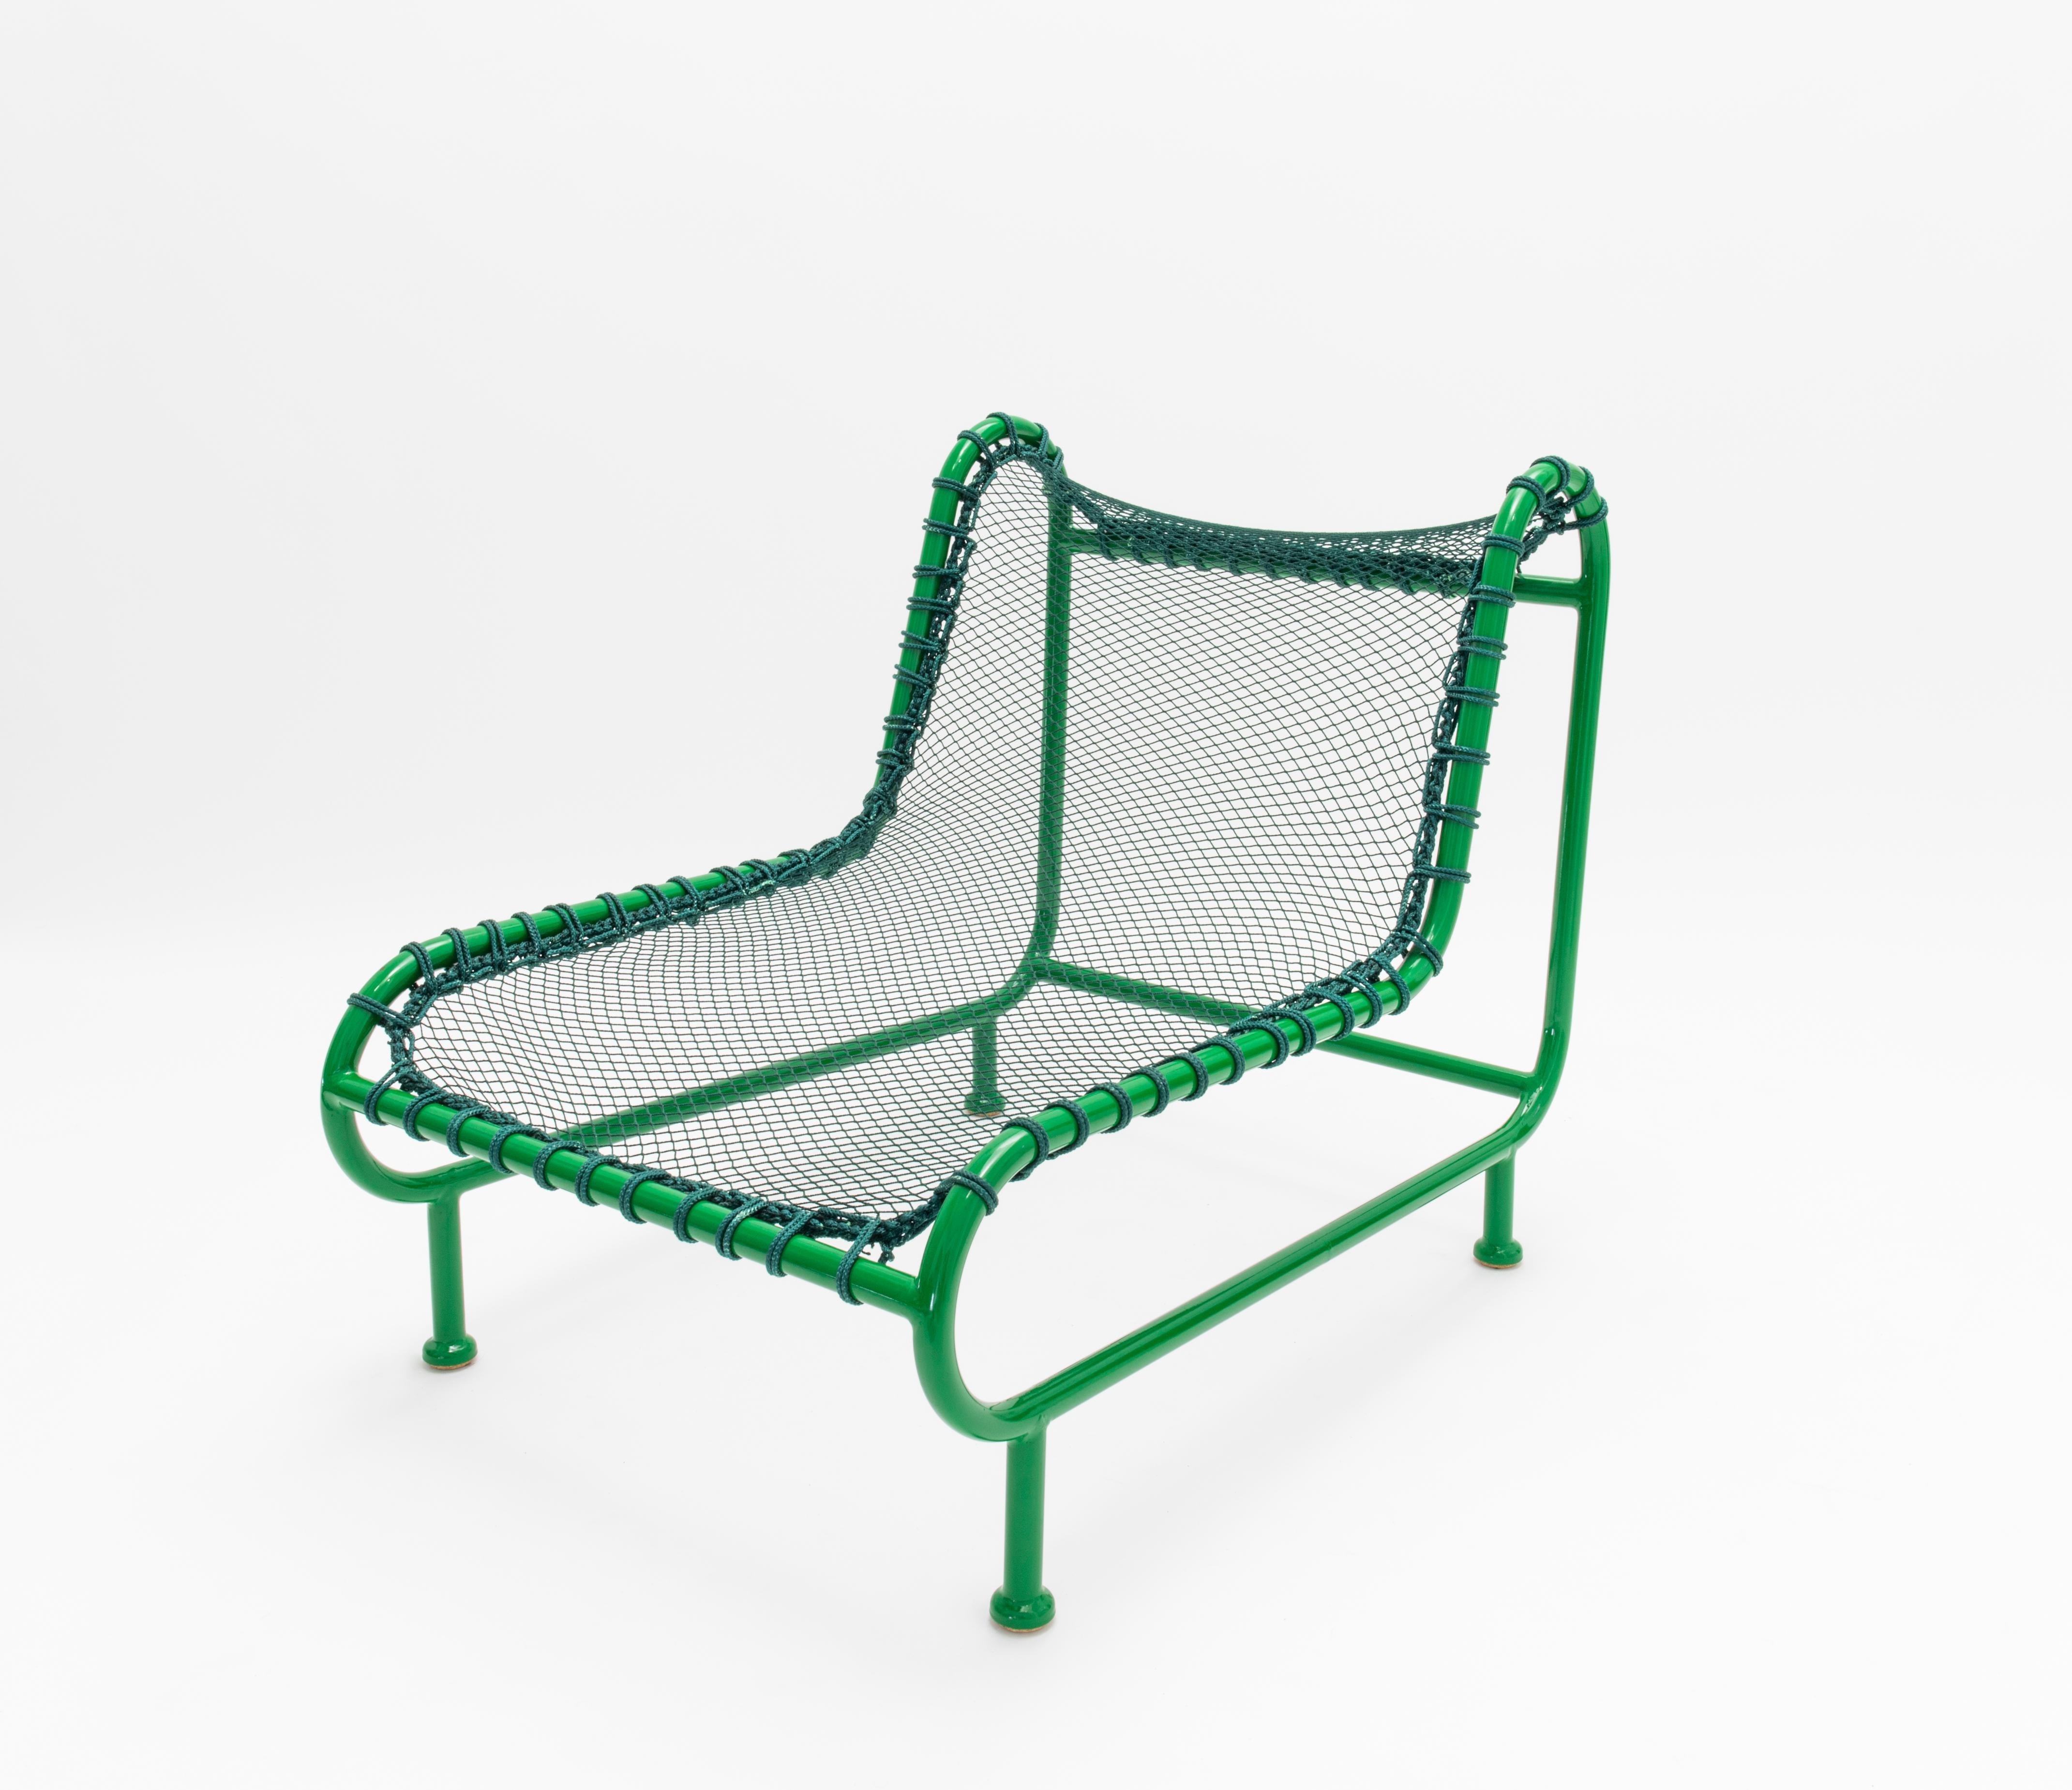 The Grand Ribaud lounge chair is designed for «farniente» in extreme conditions.

It is made using techniques traditionally used for nautical fittings.

Its structure is in bent welded steel tubes painted with an epoxy coating. The nylon net